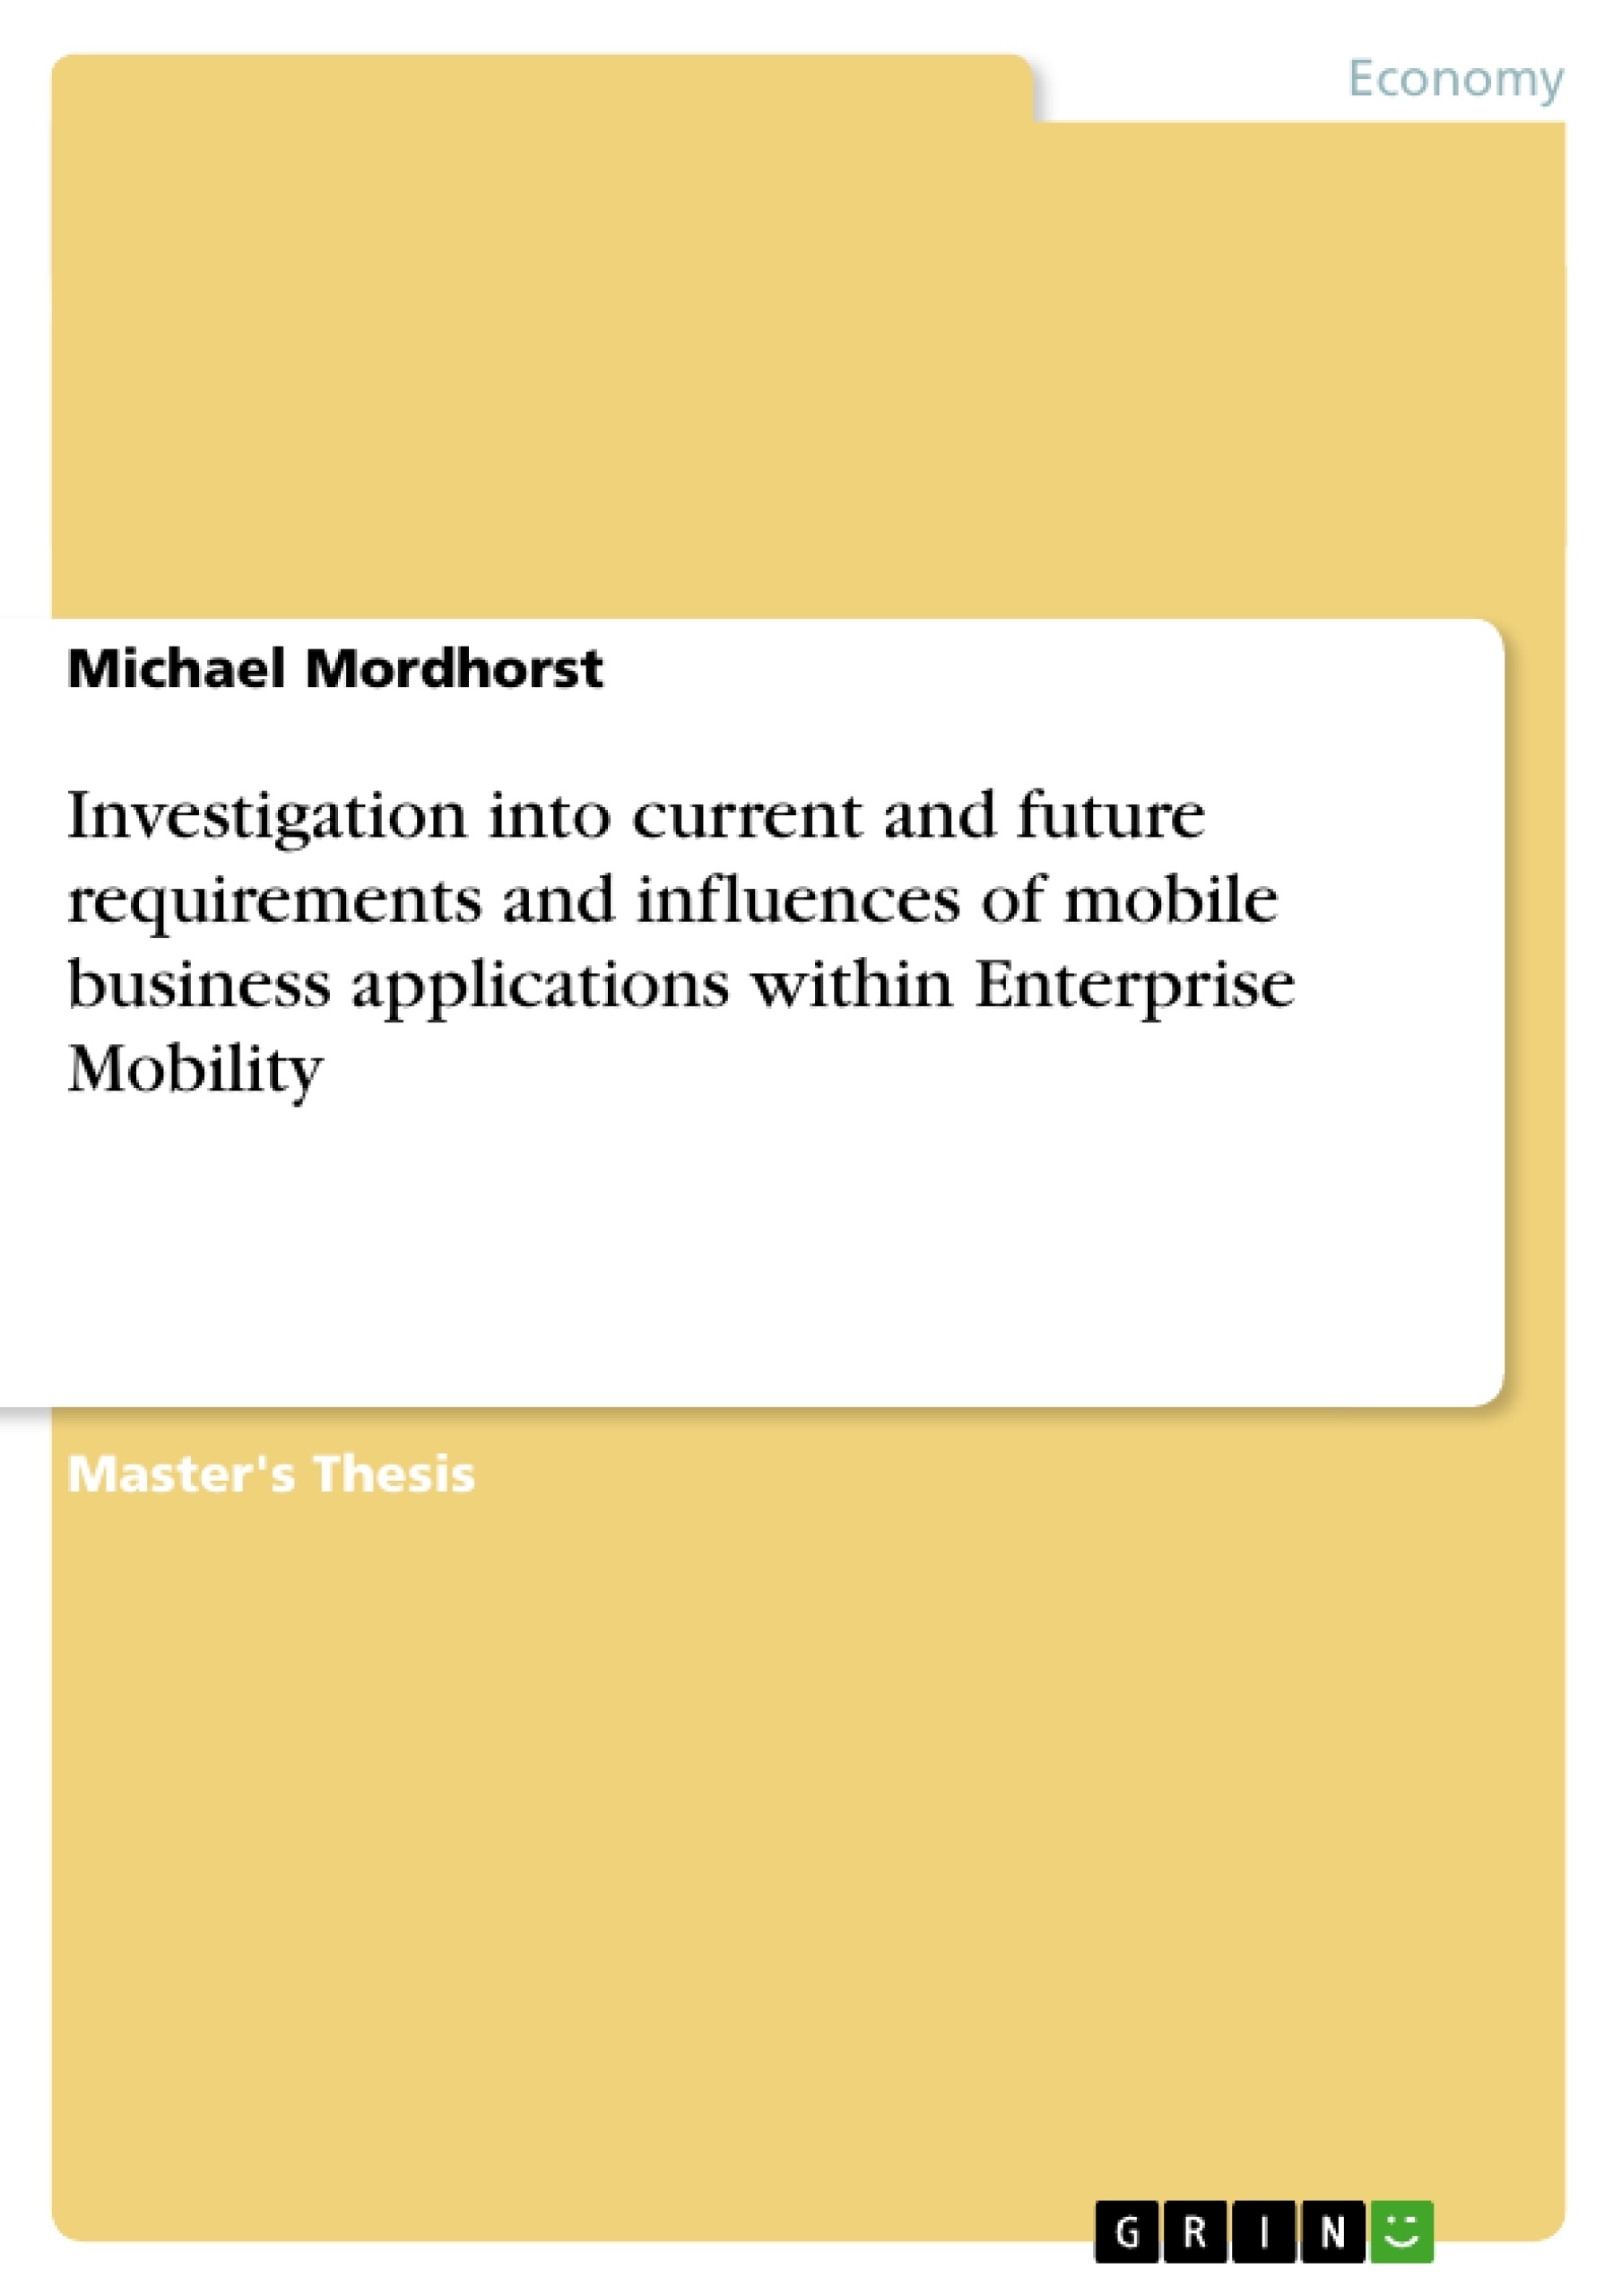 Título: Investigation into current and future requirements and influences of mobile business applications within Enterprise Mobility